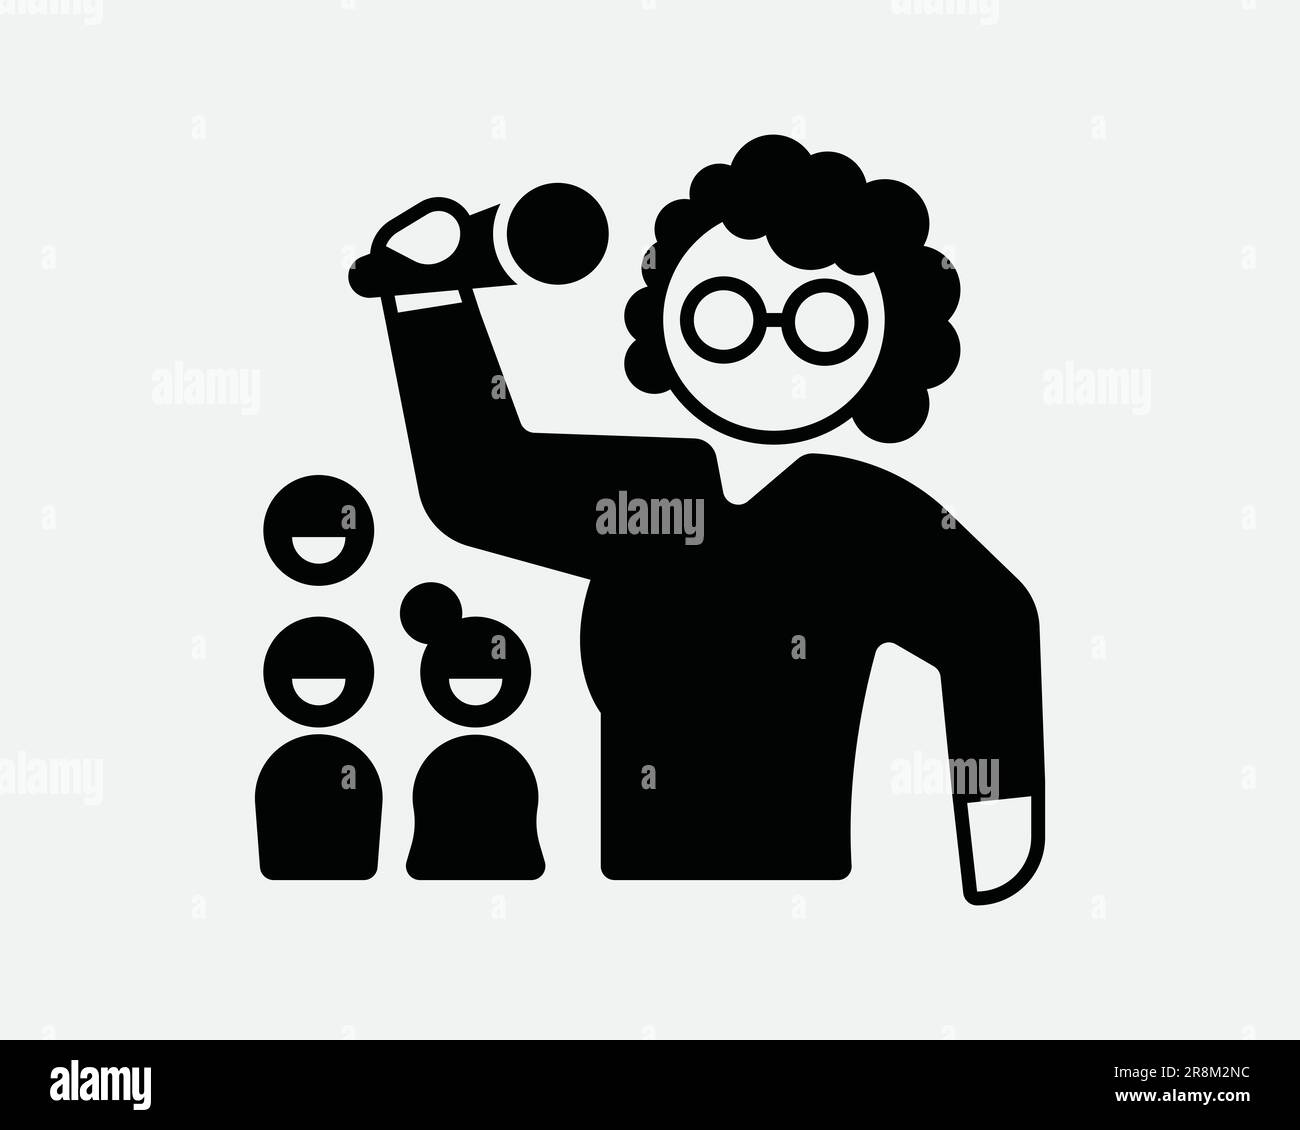 Female Stand-Up Comedian Icon. Laugh Entertainment Entertainer Performer Show Black White Sign Symbol Illustration Artwork Graphic Clipart EPS Vector Stock Vector